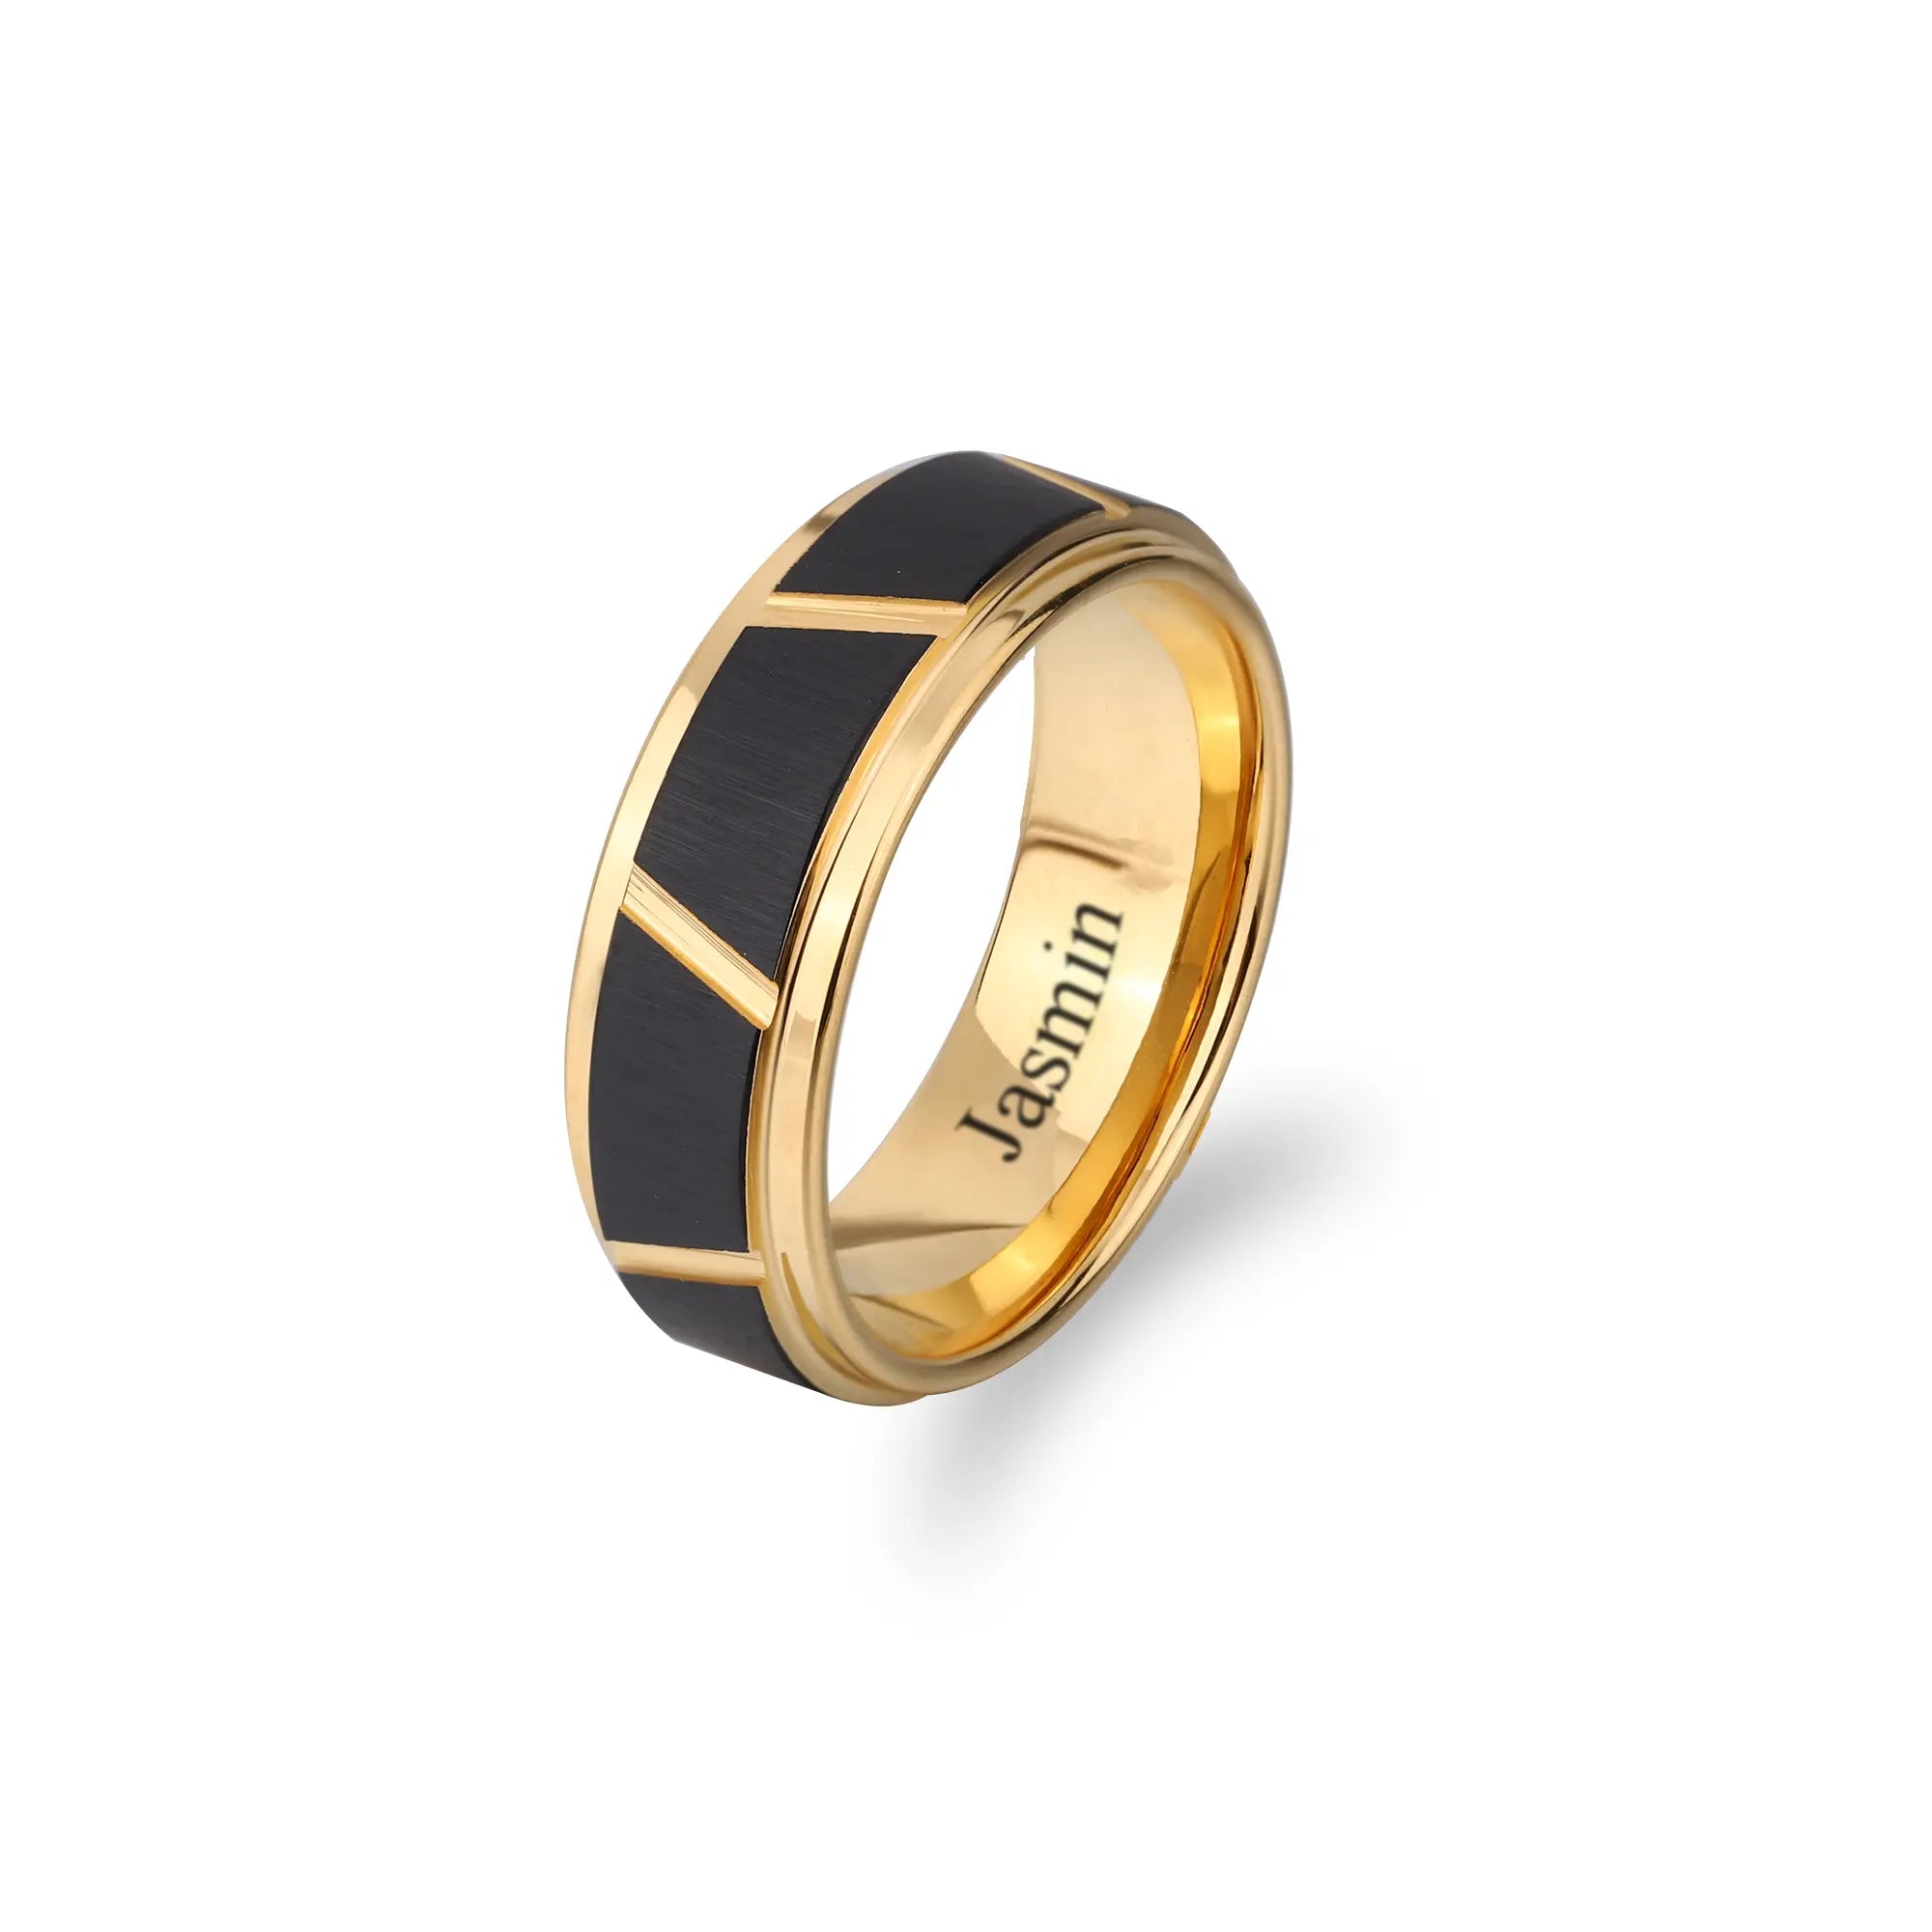 Tungsten Carbide Ring, gift for him